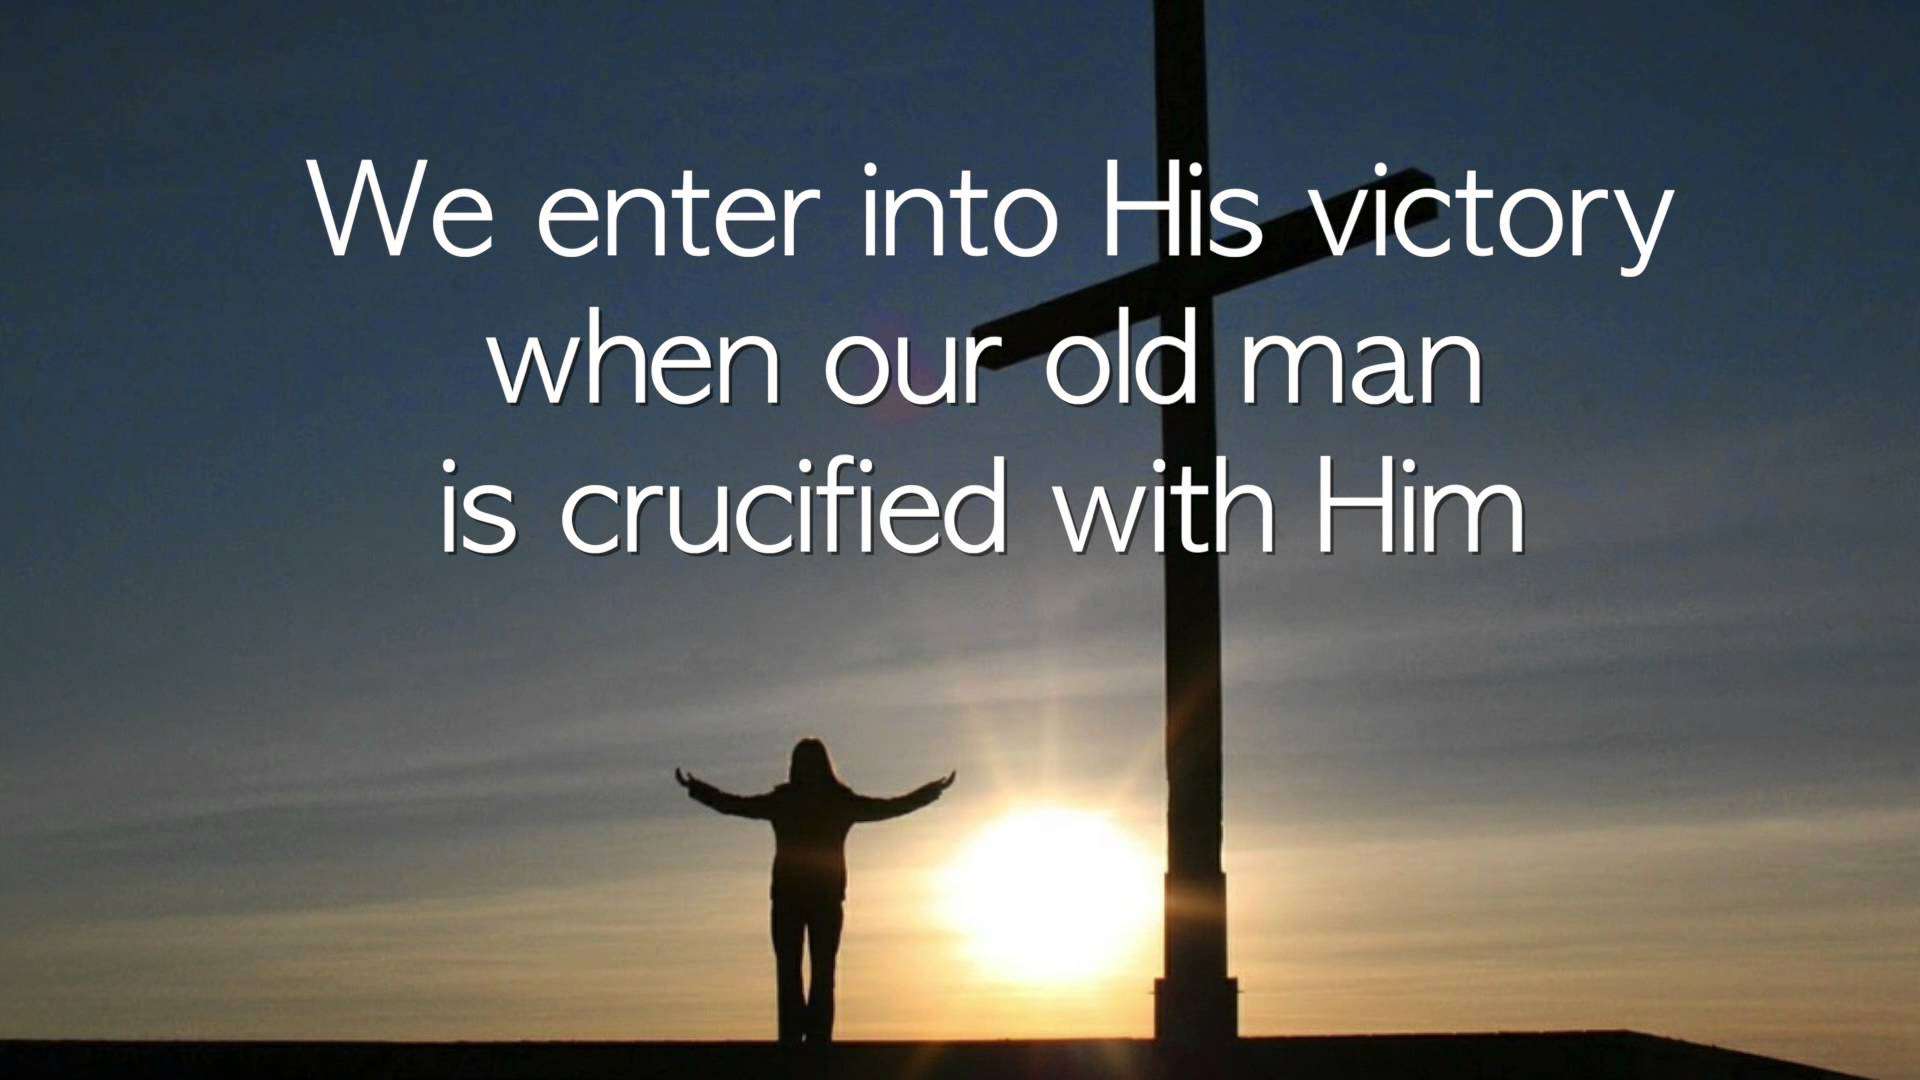 GIFT OF JESUS: NOW WE CAN BE VICTORIOUS IN EVERY SITUATION